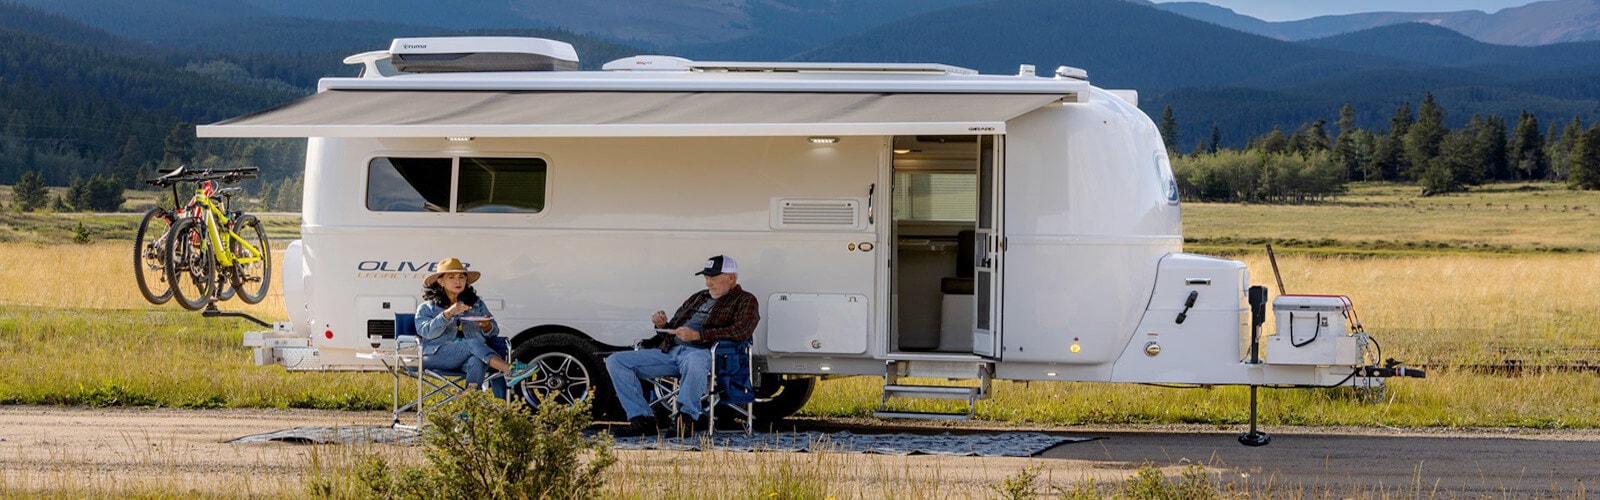 Ttravel trailer with comfortable sleeping and living spaces, perfect for couples.